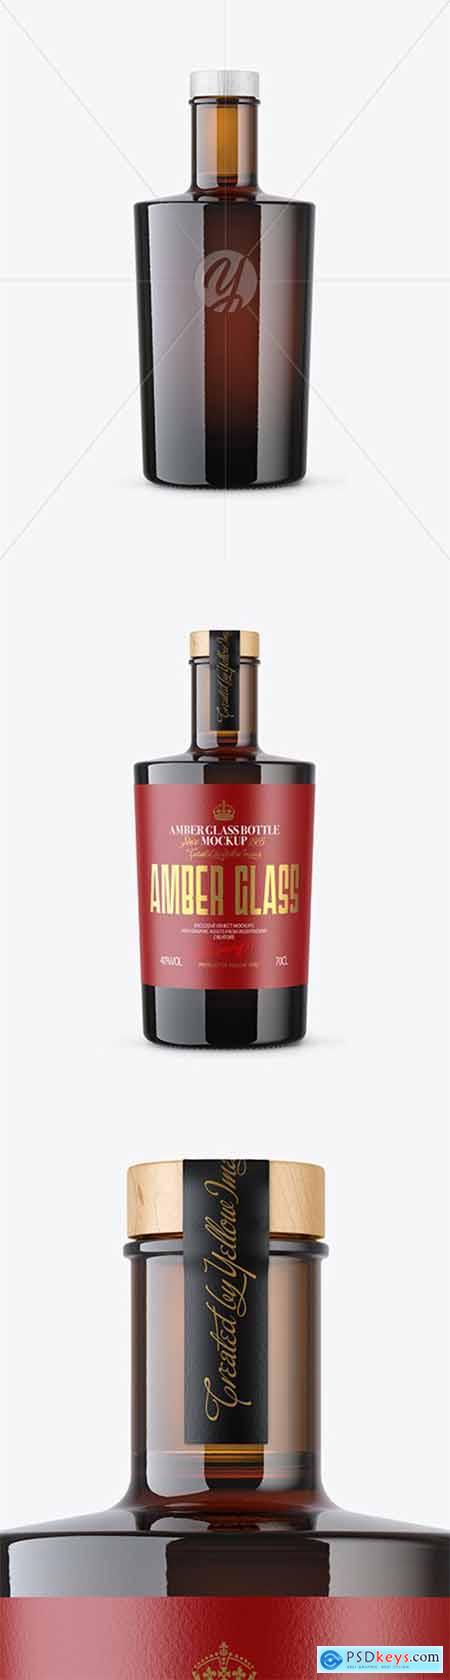 Amber Glass Bottle with Wooden Cap Mockup 80359